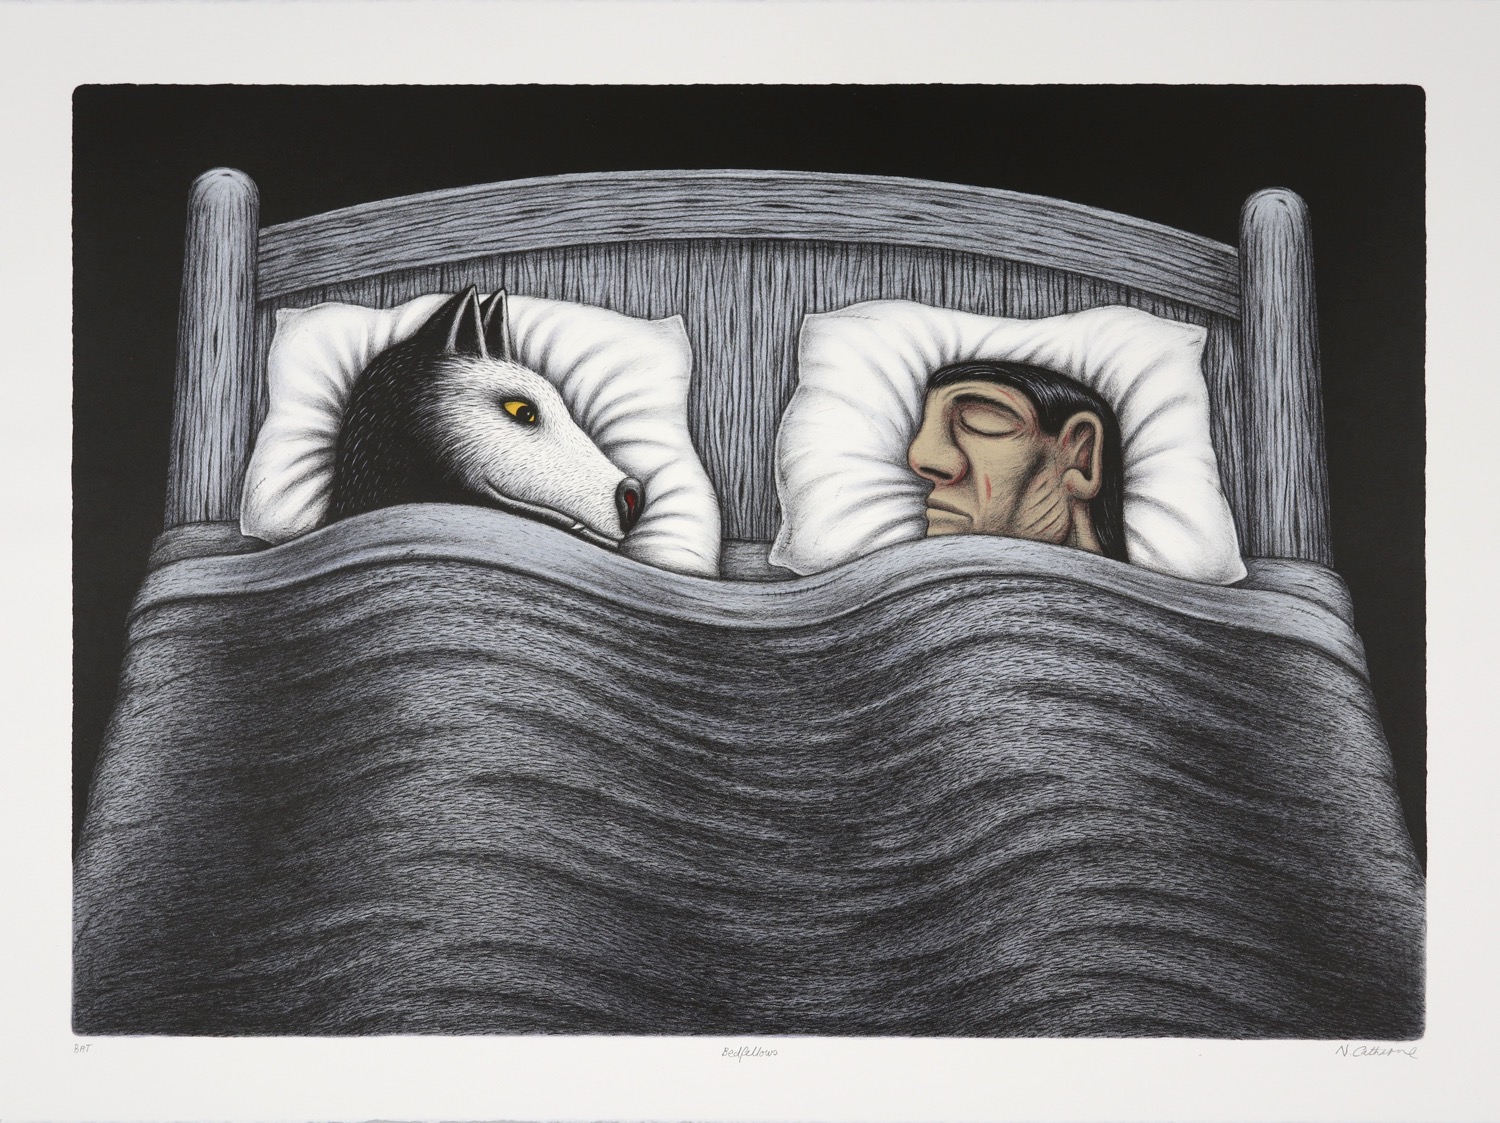 A dog and a man tucked into a bed with the dog watching the sleeping man